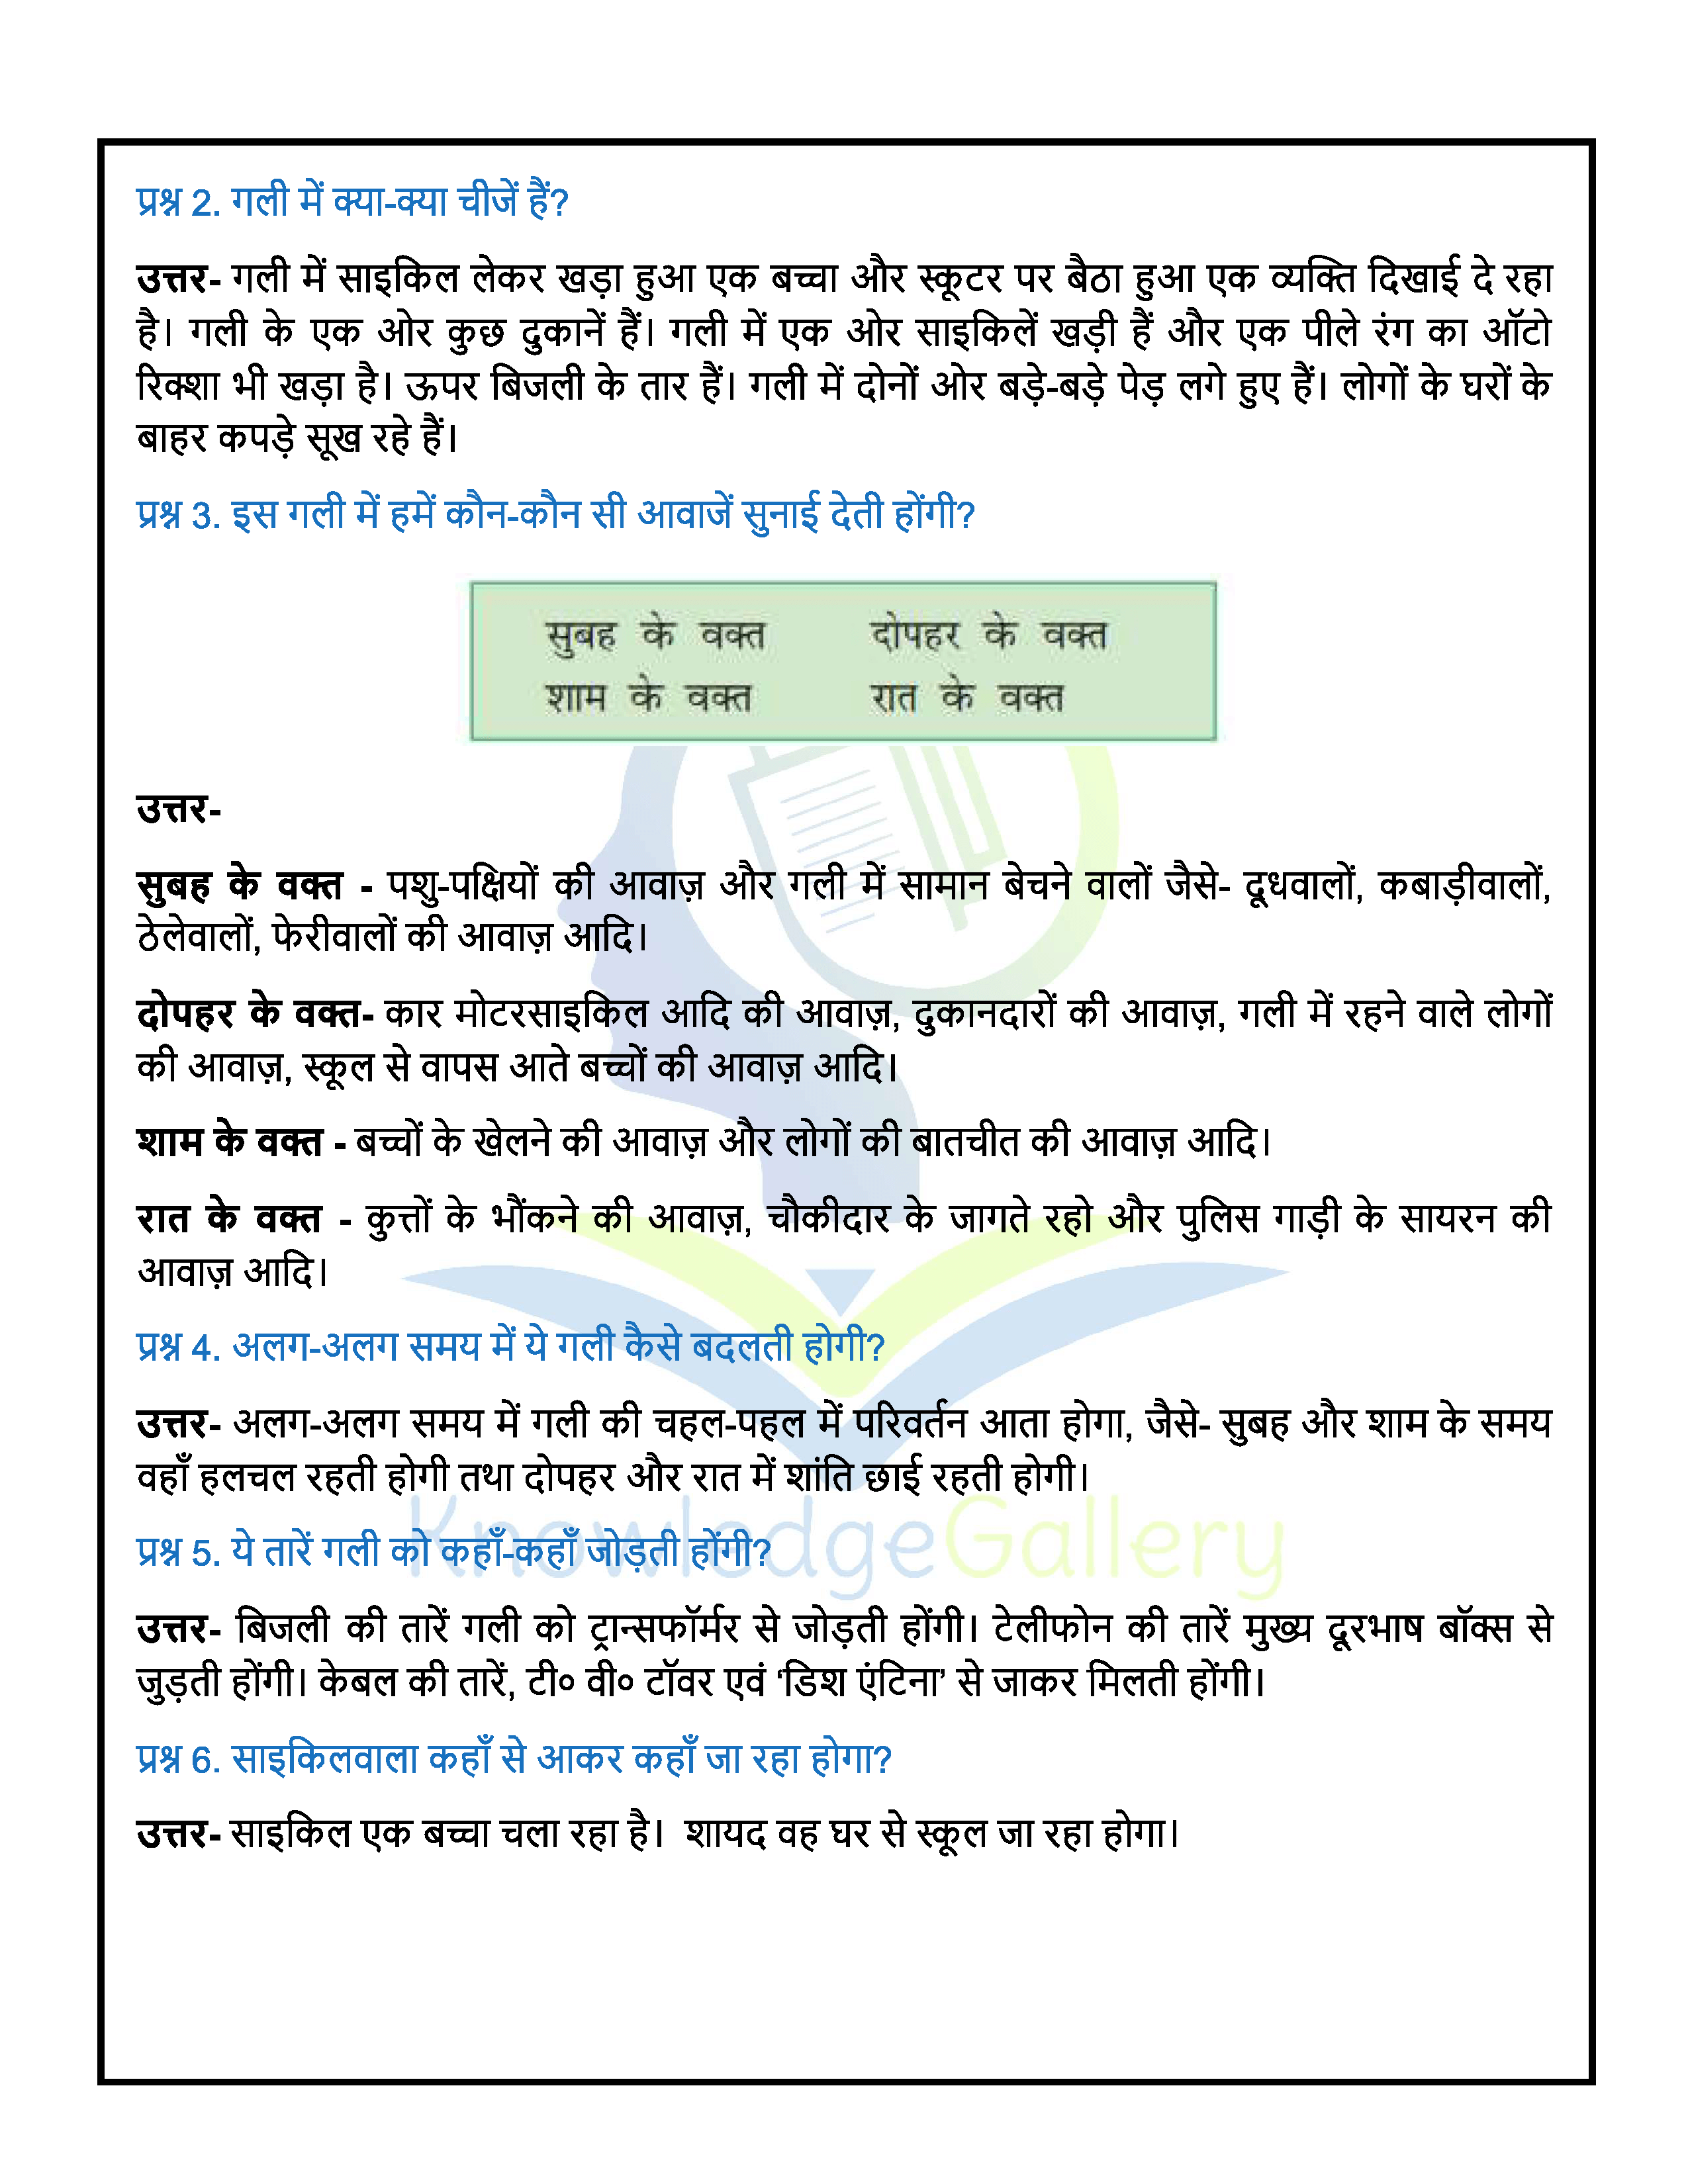 NCERT Solution For Class 6 Hindi Chapter 11 part 6